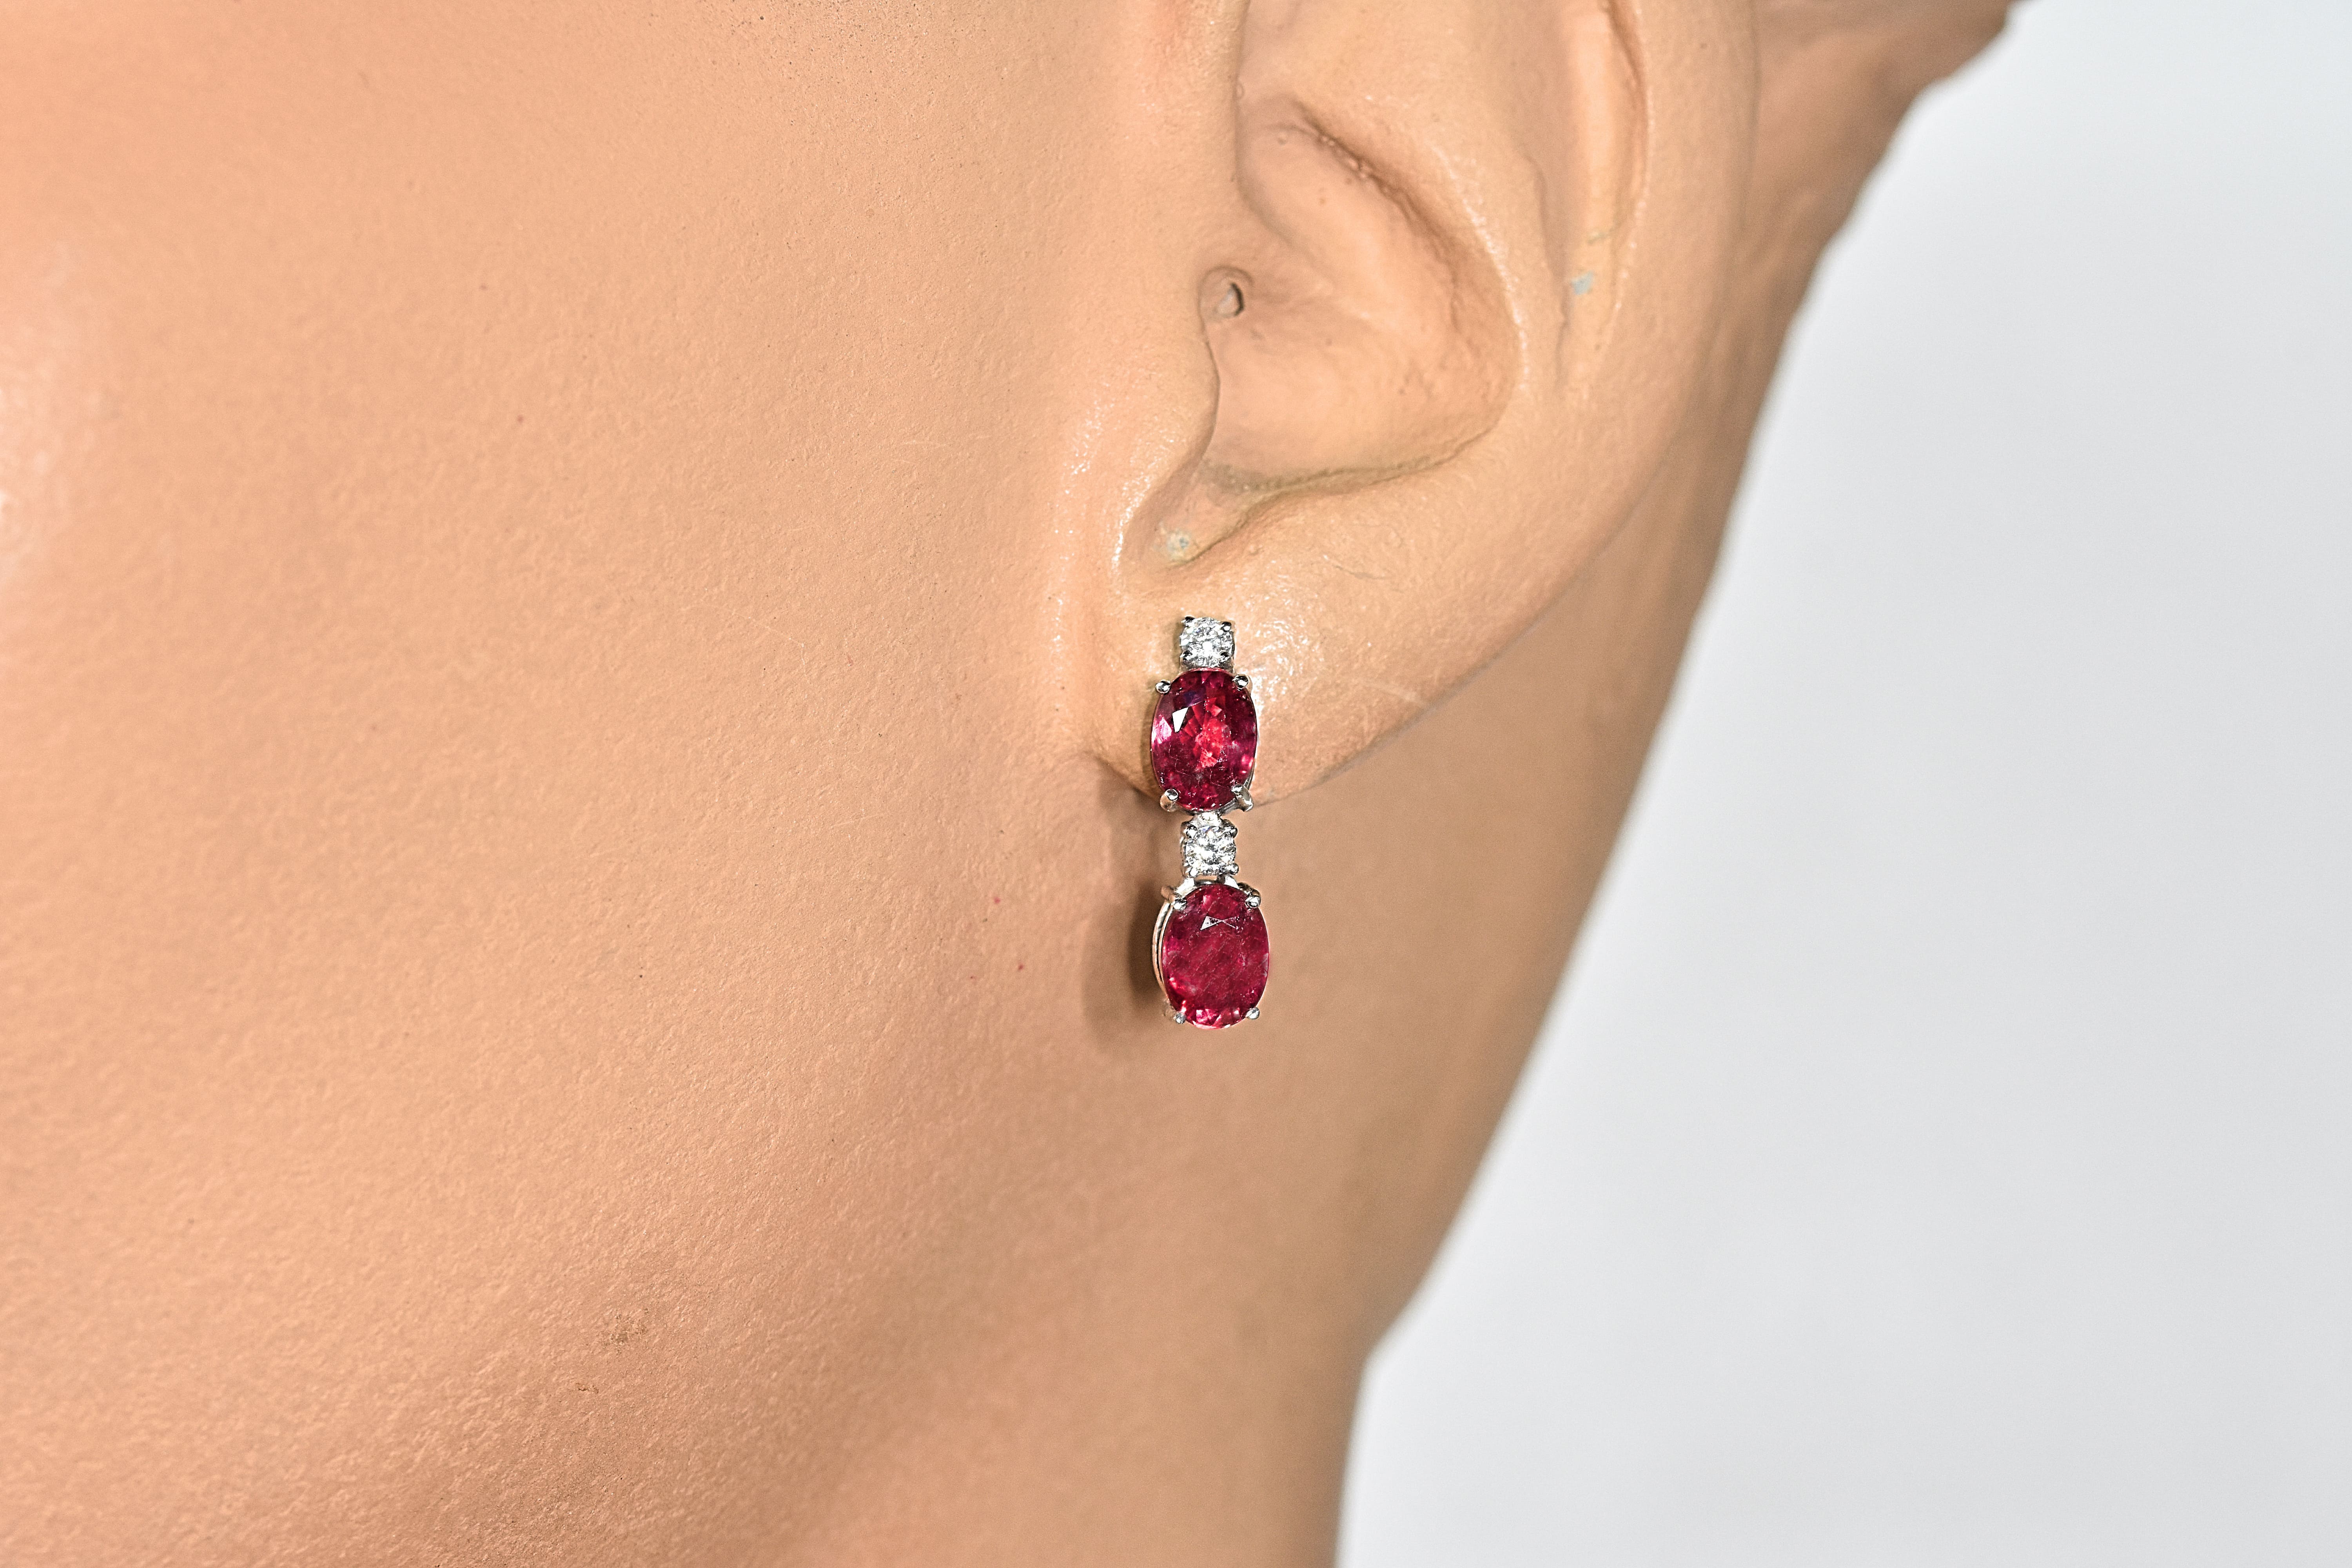 Earrings - 4.65 ct Ruby - Diamonds - NO RESERVE price! - Image 5 of 6